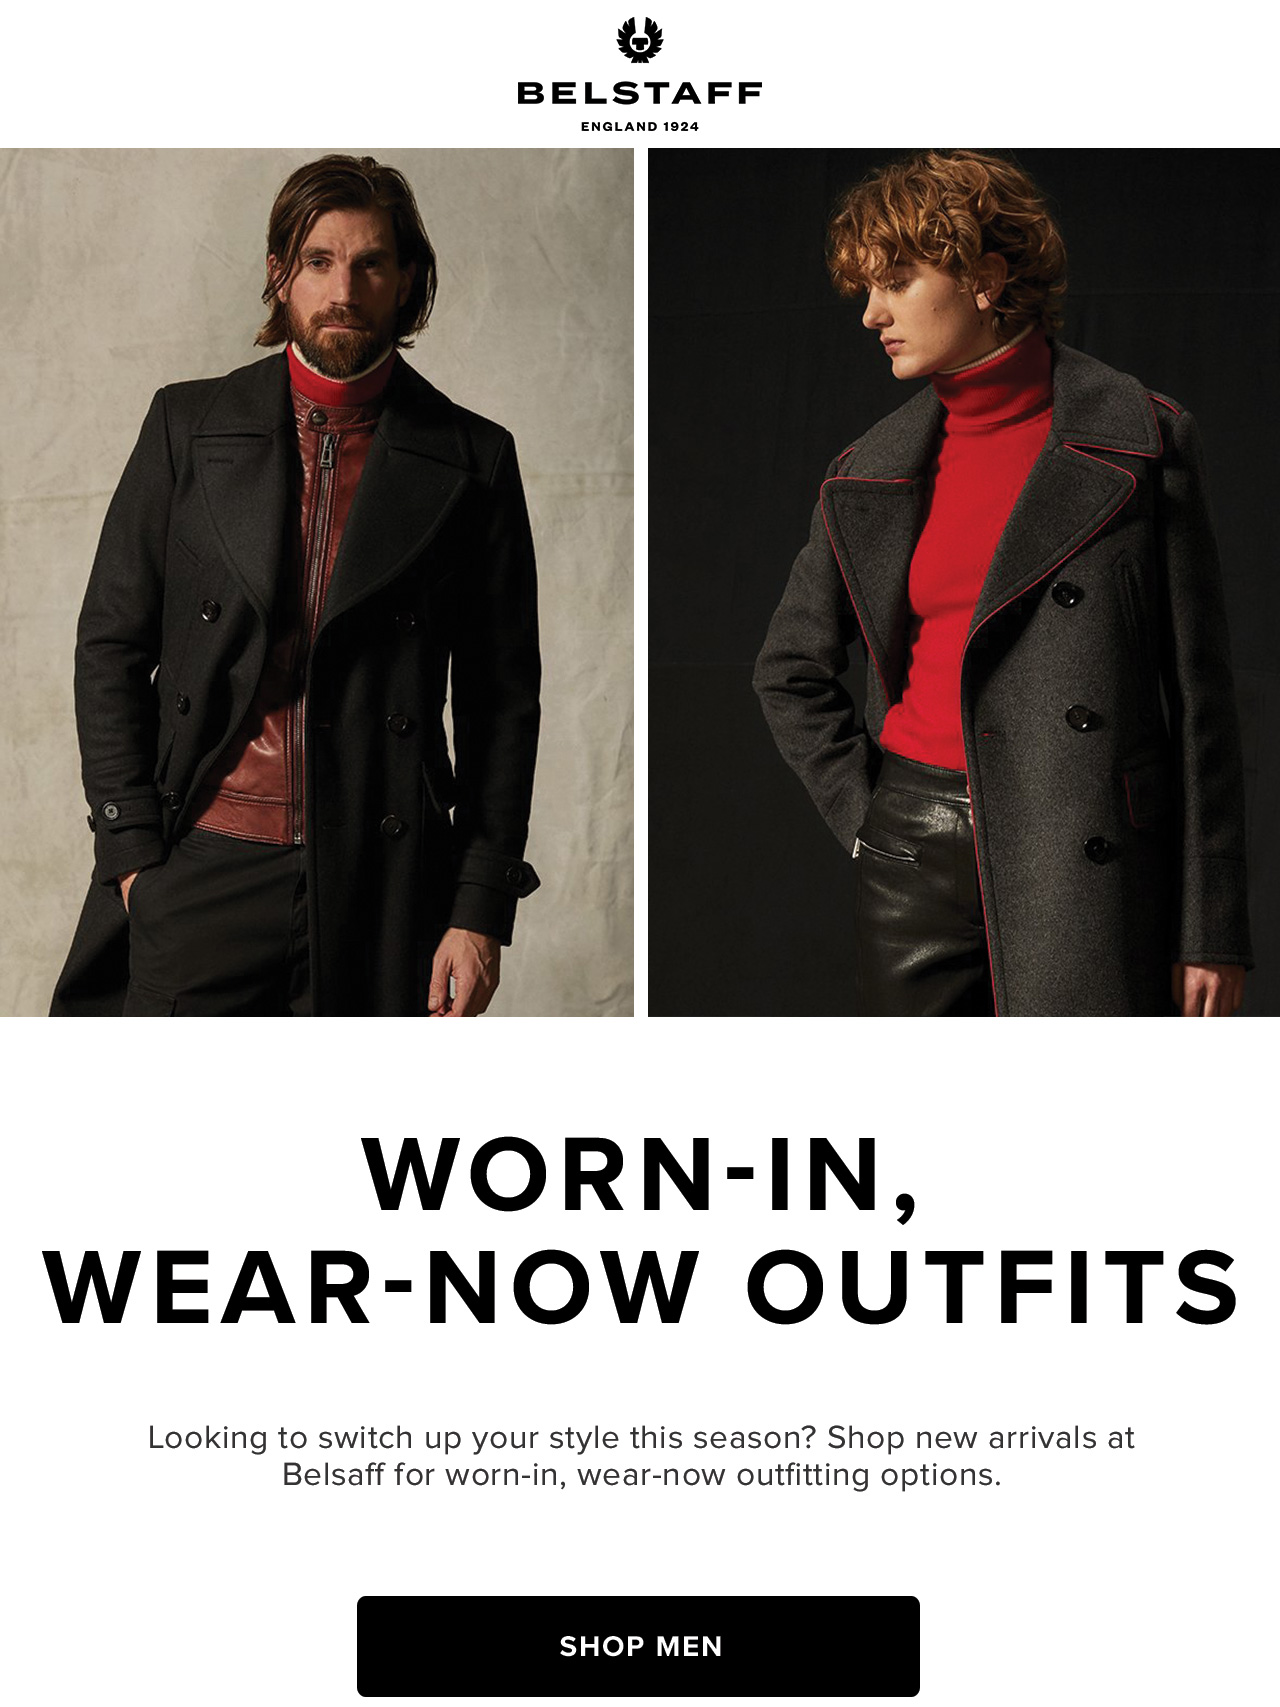 Looking to switch up your style this season? Shop new arrivals at Belsaff for worn-in, wear-now outfitting options. Shop Men.